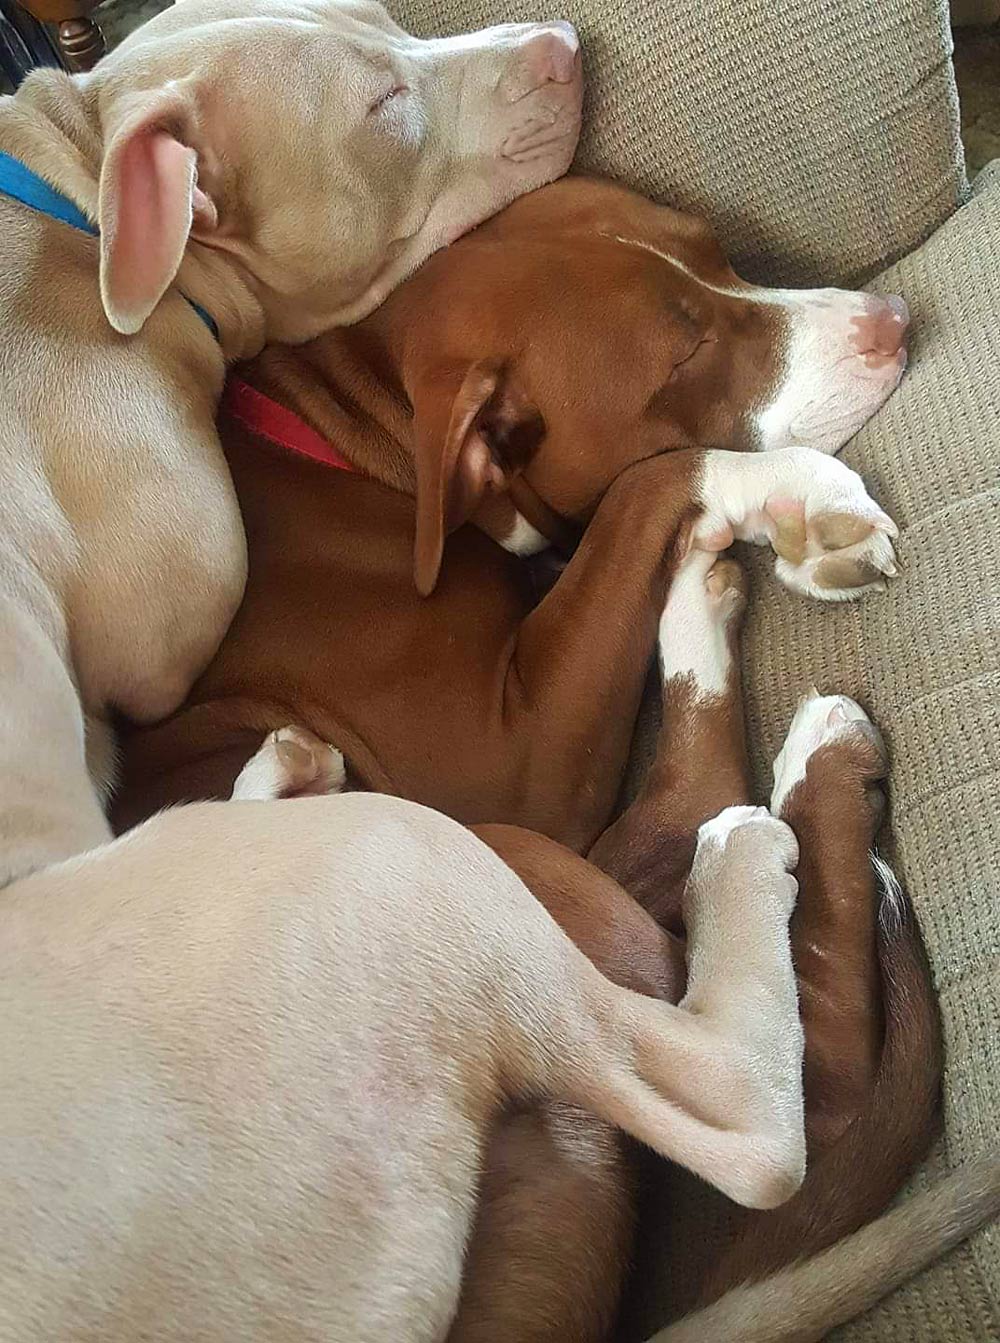 Beth B. in Freeport, PA sent a picture of her Pittie girls sleeping together, Pearl on top of Minnie!